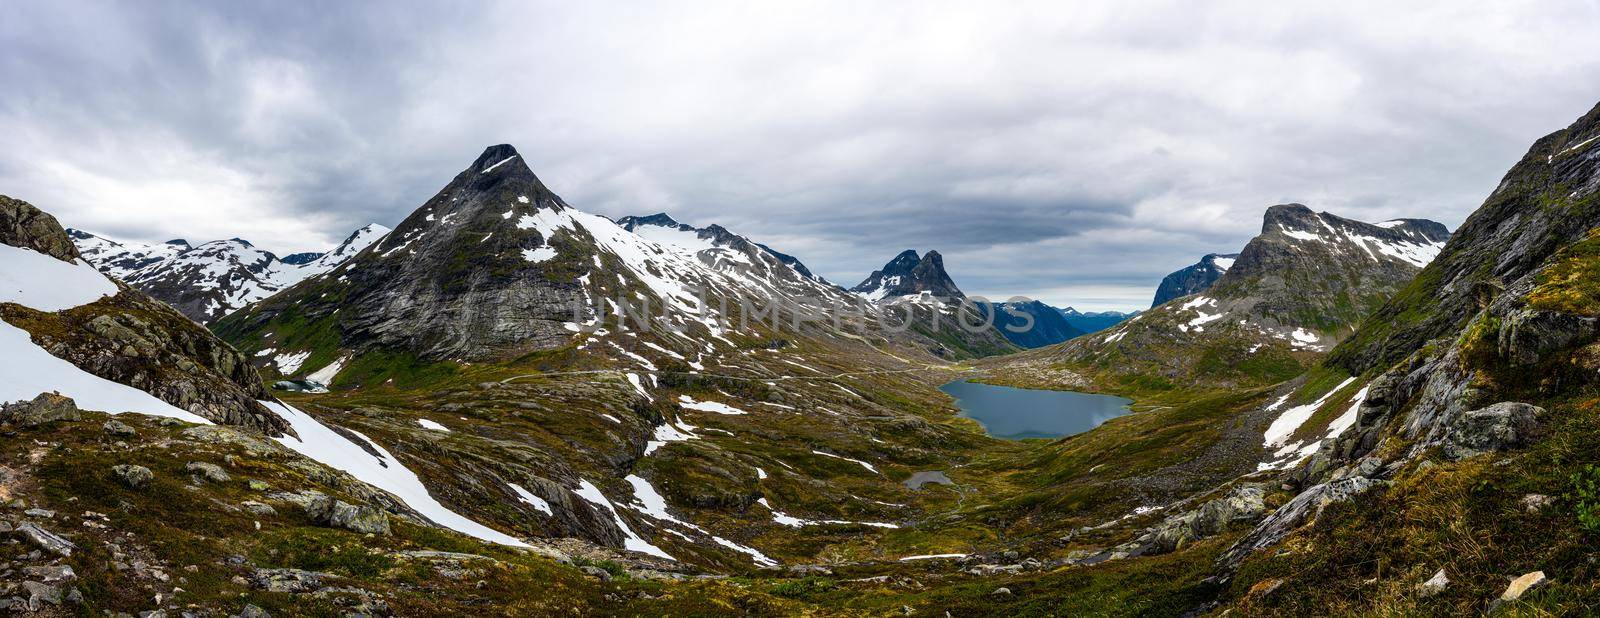 Panorama of the landscape in Reinheimen National Park by elxeneize